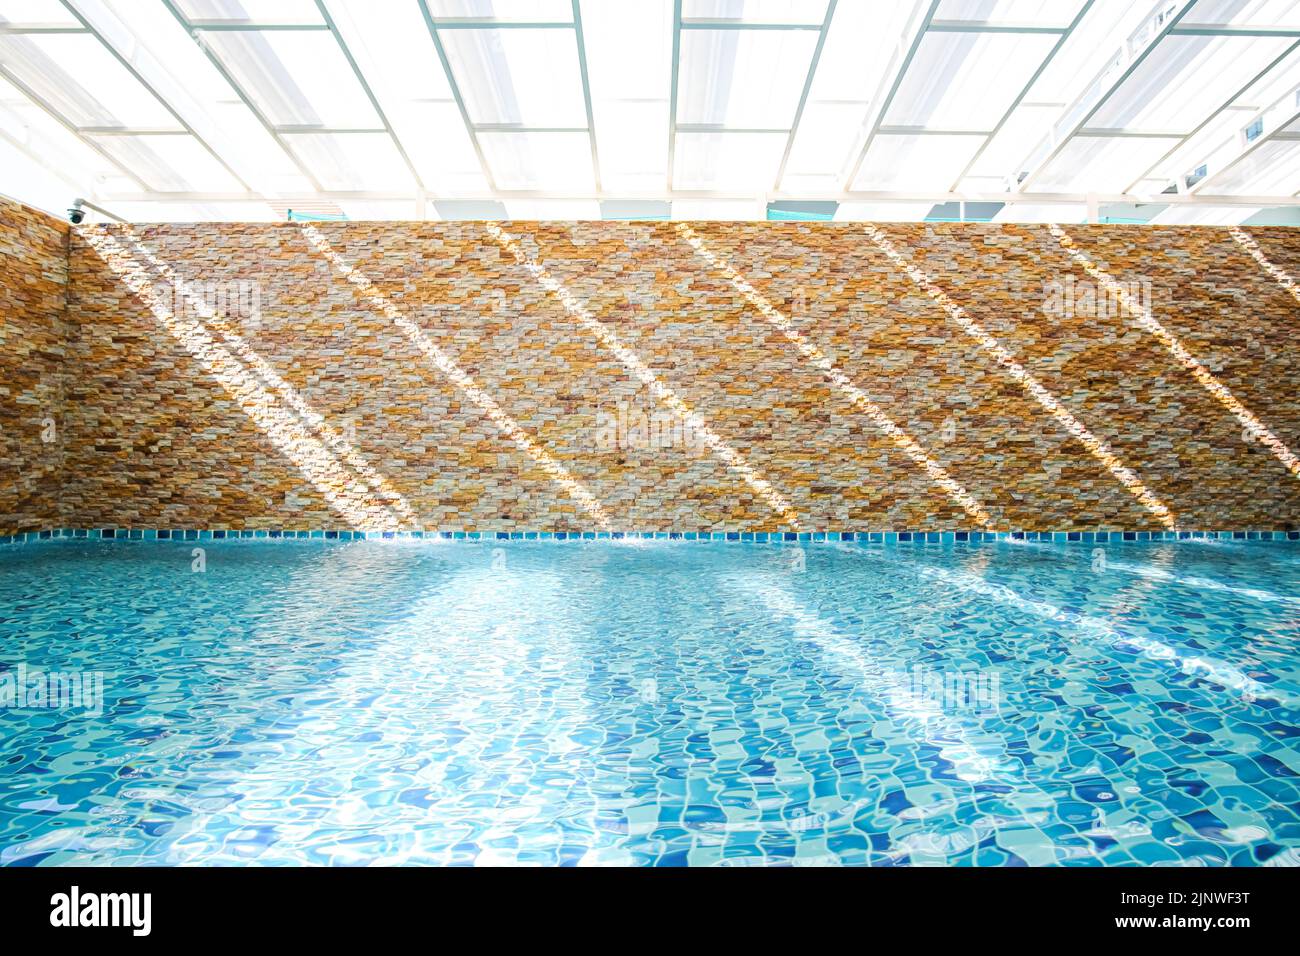 In an empty turquoise swimming pool, sunlight shines through a translucent roof on the surface of the water and a stone wall in the backdrop. Stock Photo